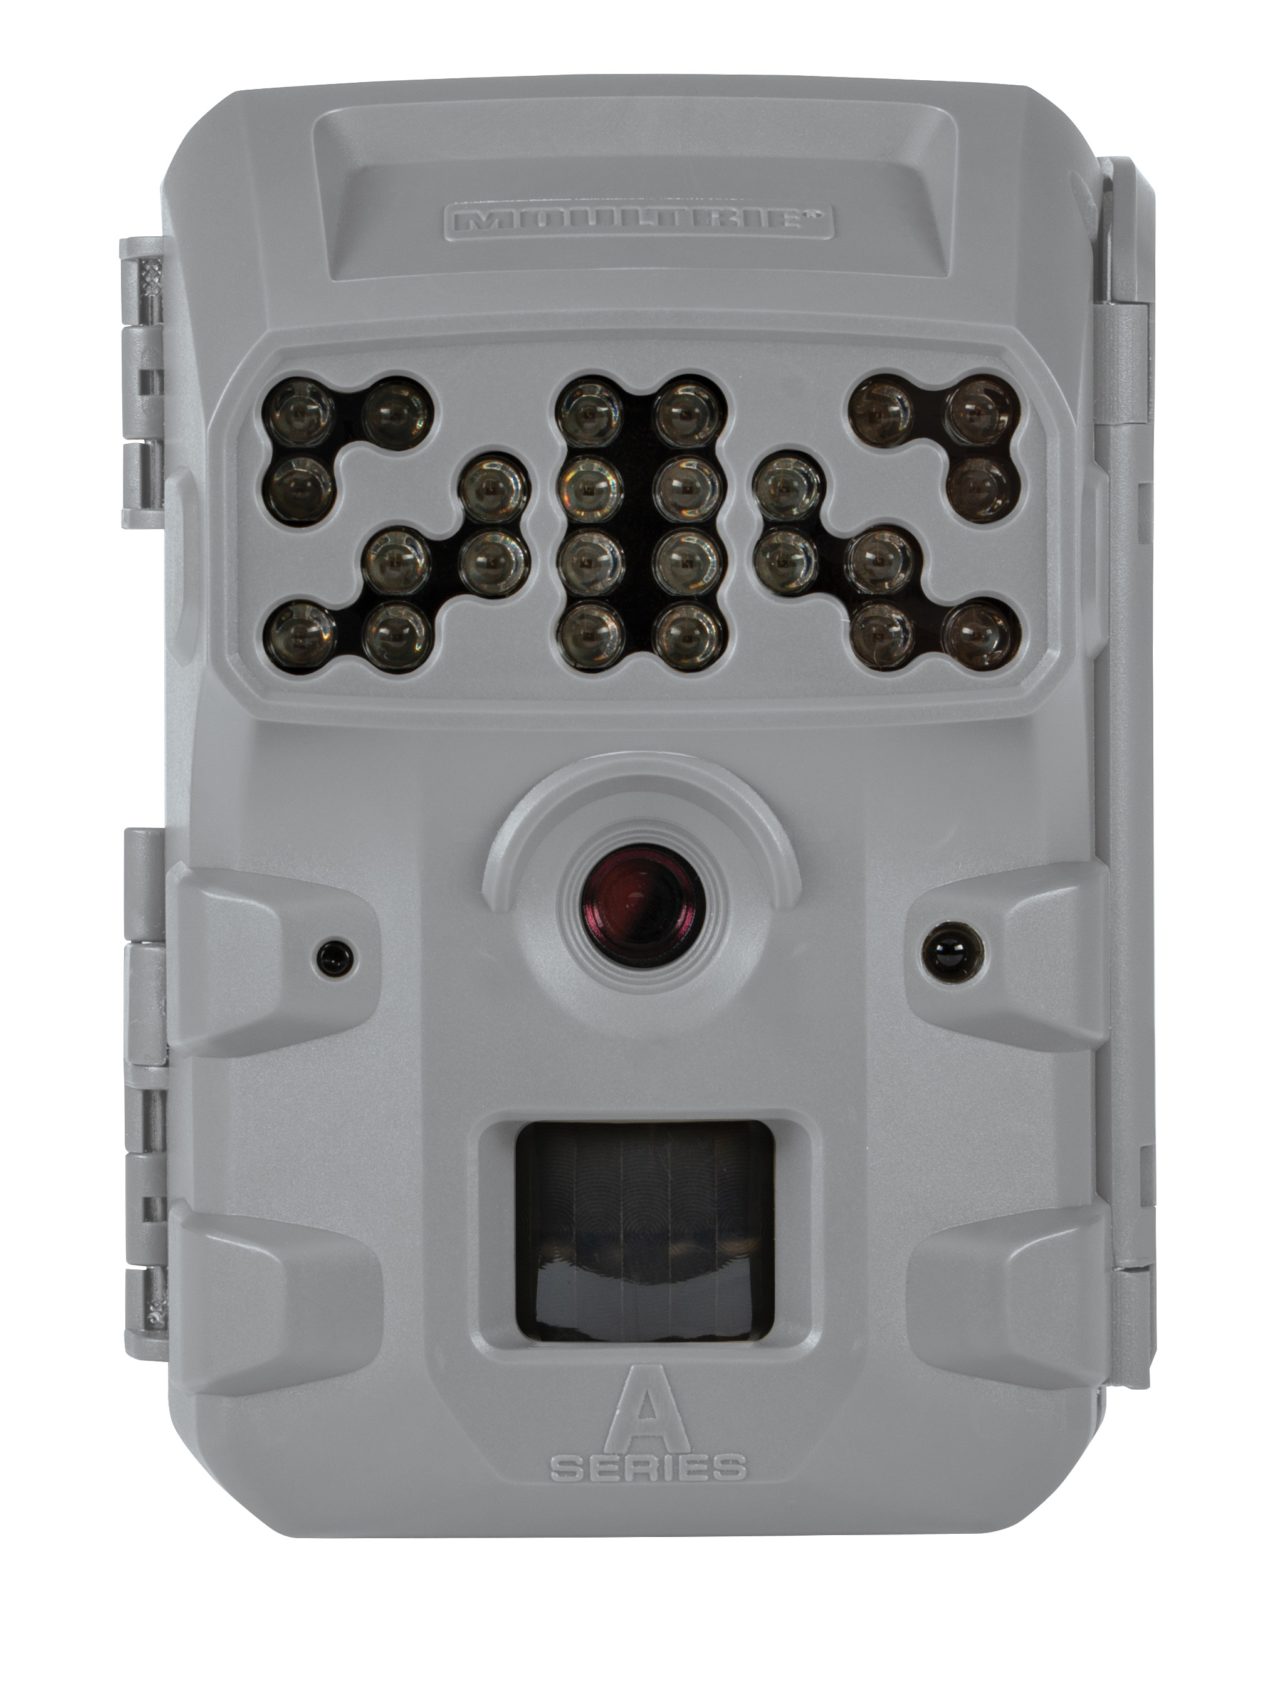 Moultrie to Introduce Four New A-Series Cameras in 2019